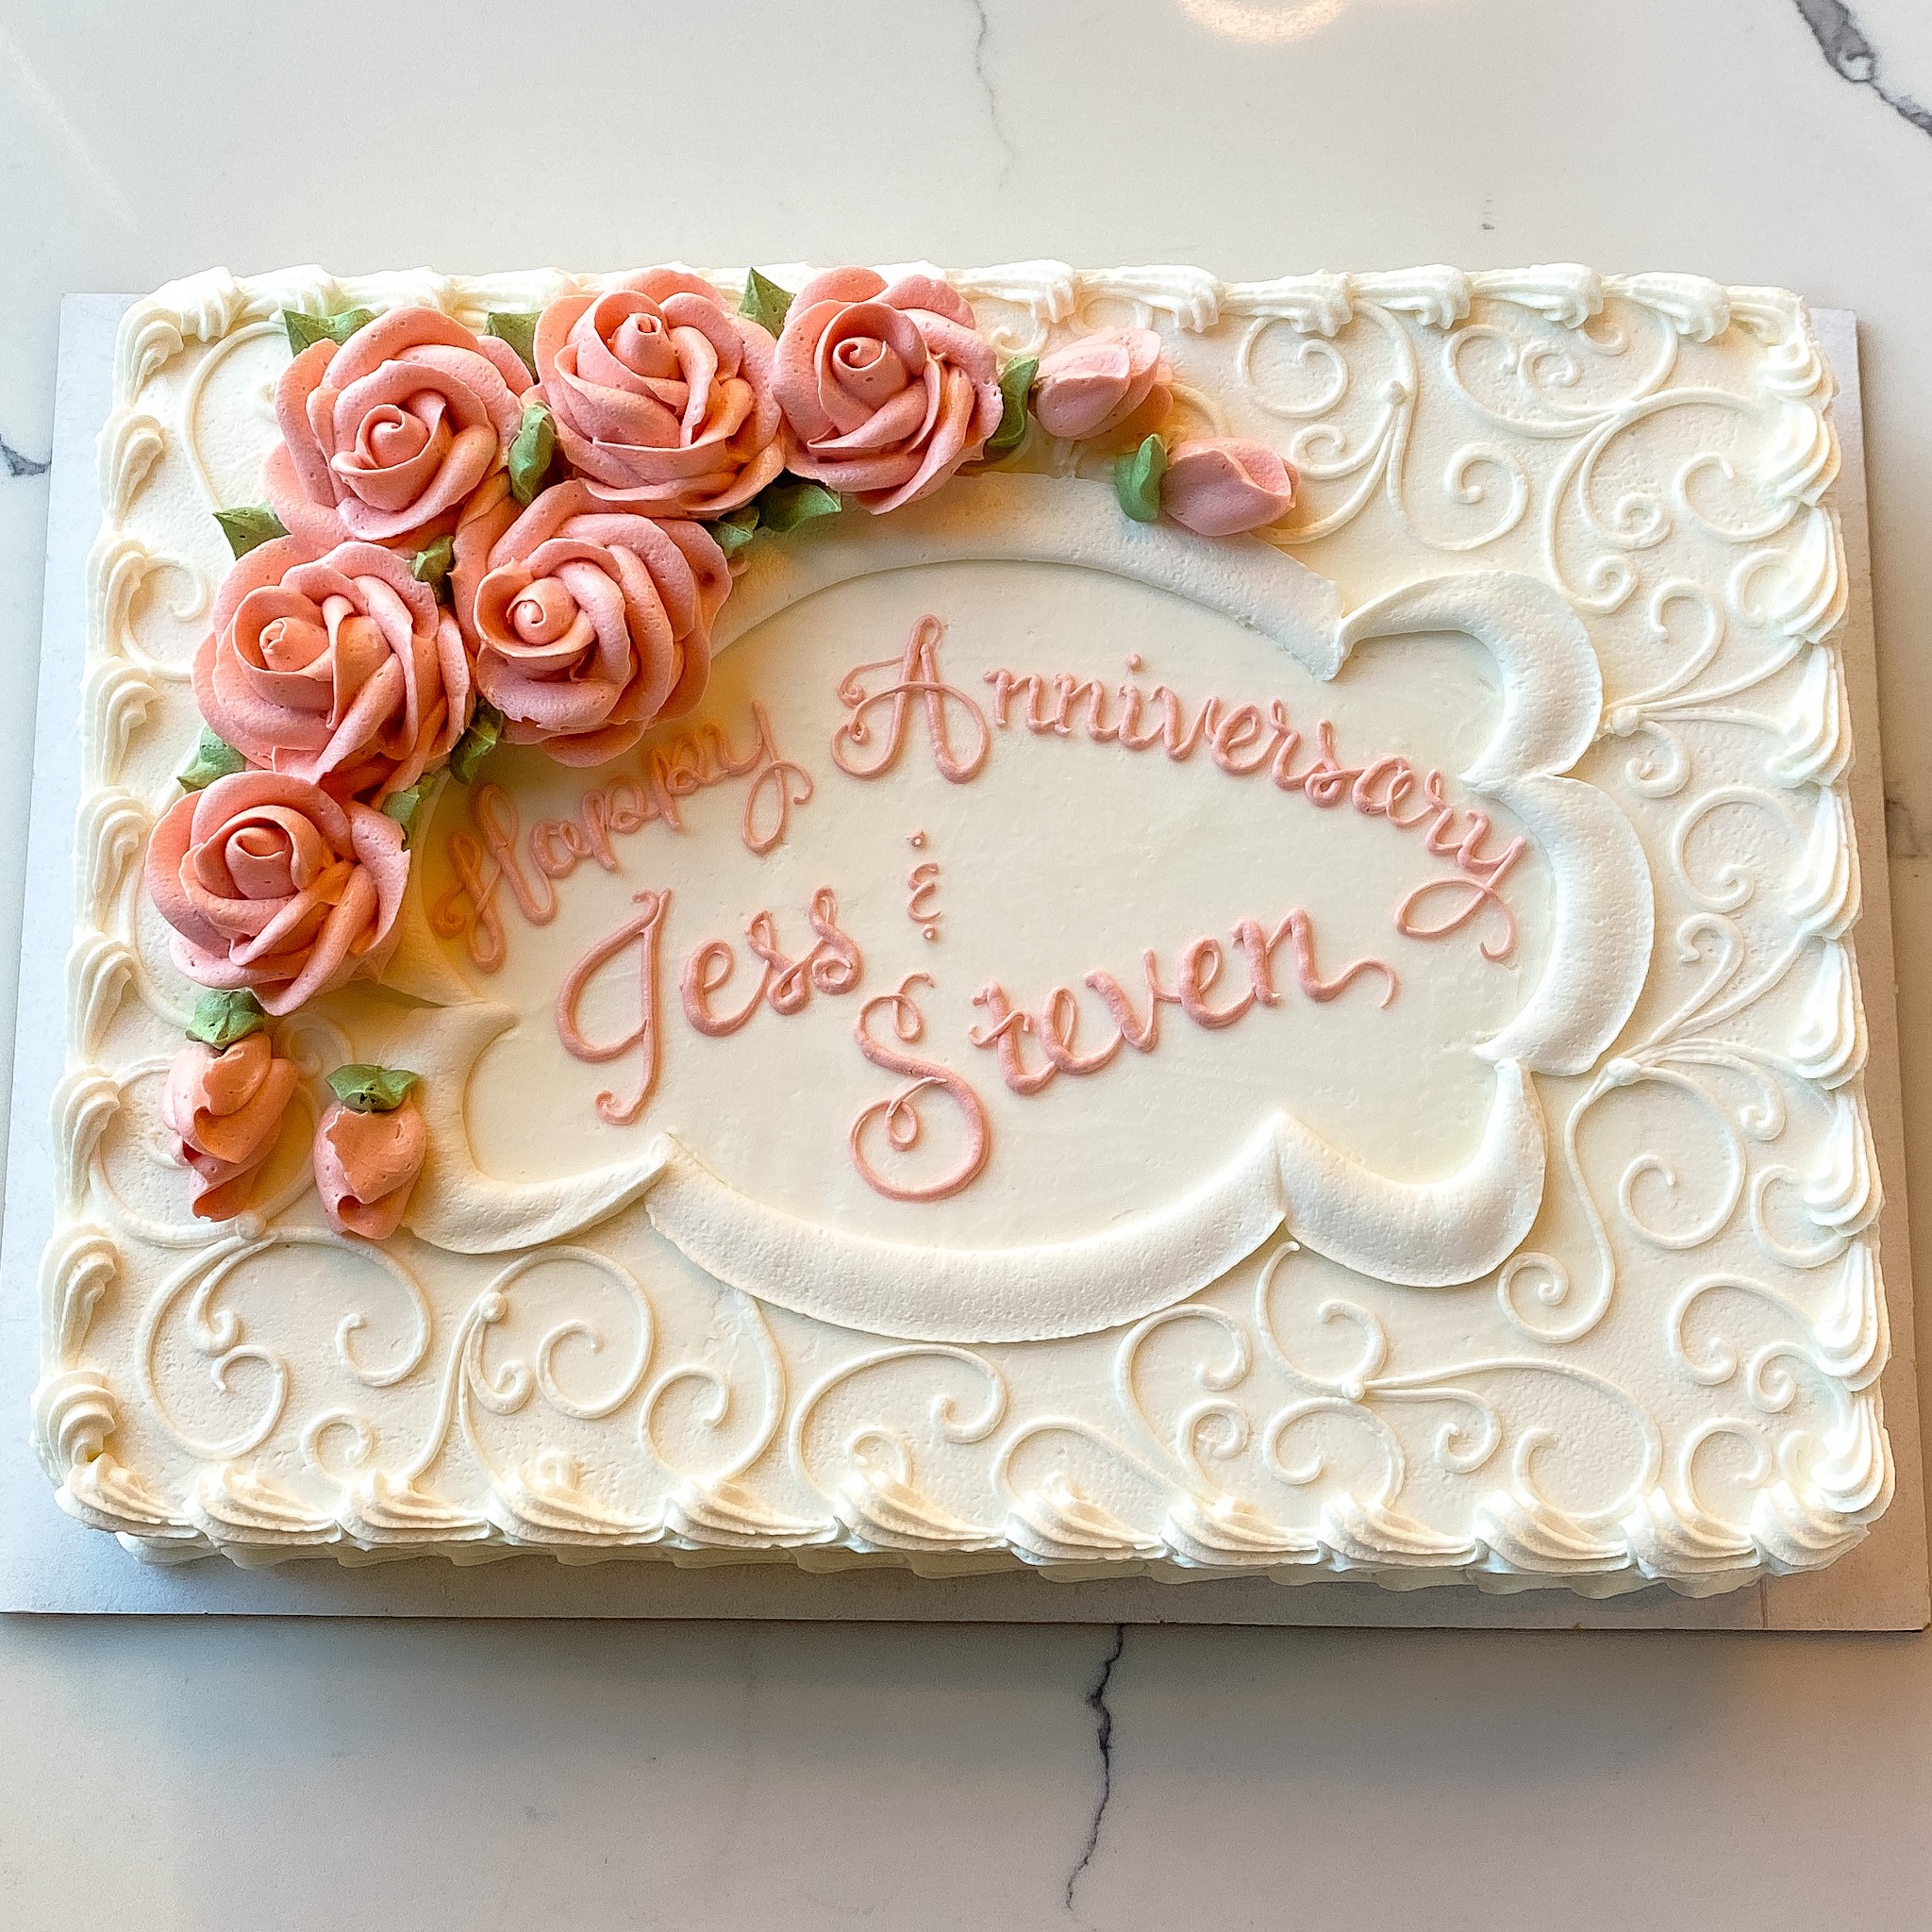 Rose Gold Cake Inspiration Too Pretty To Eat | Bridal Shower 101